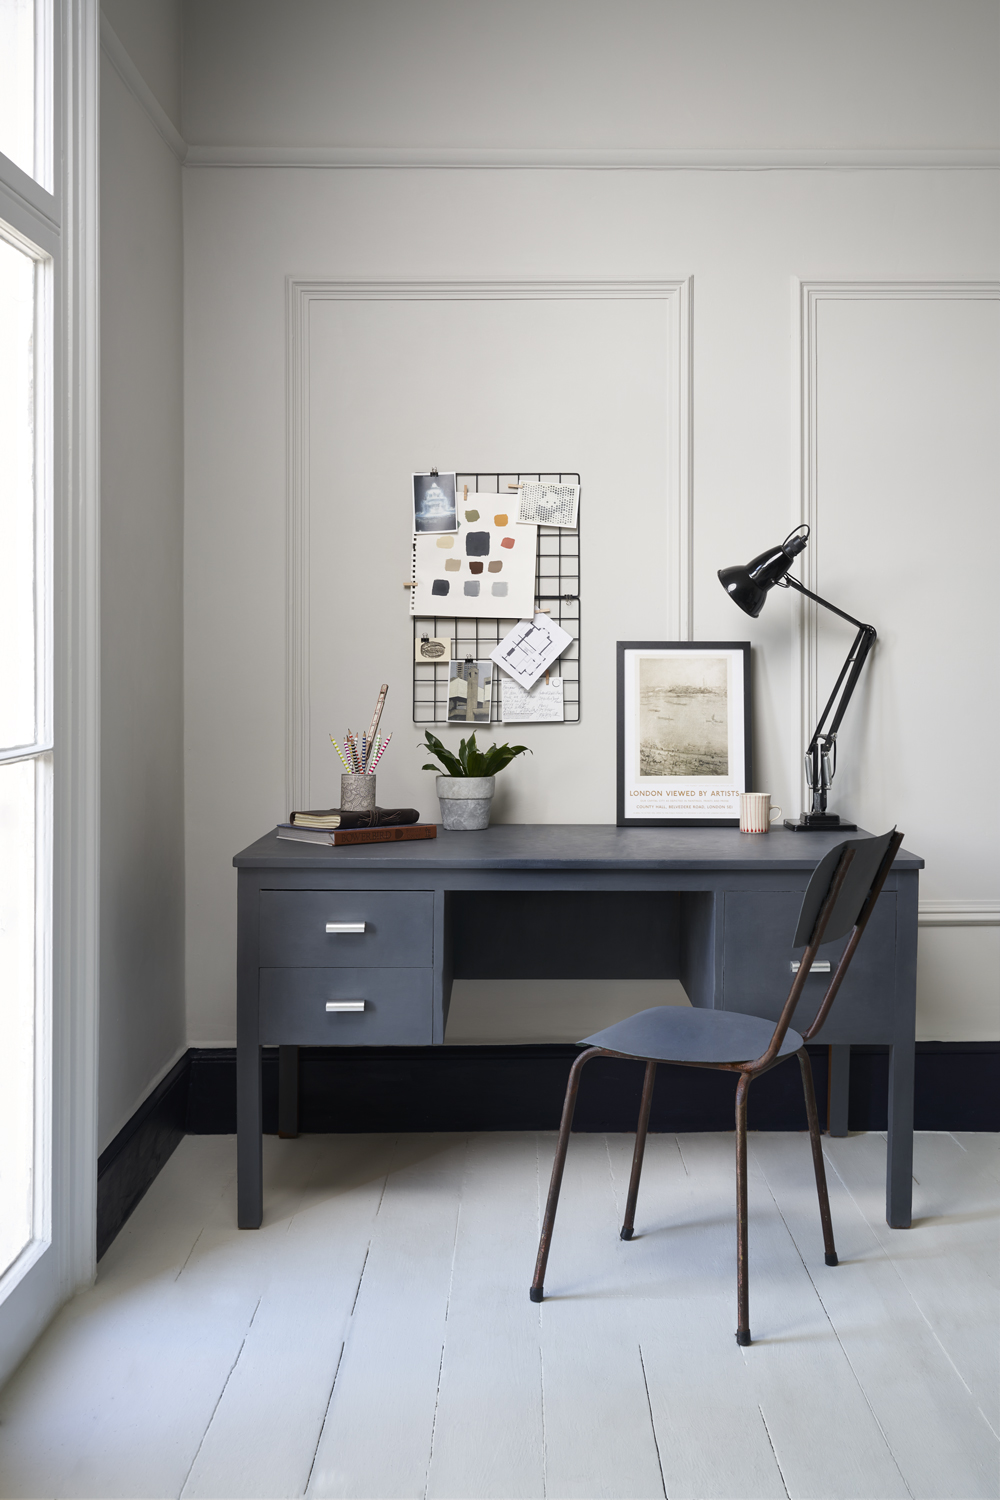 Office Space Lifestyle Image Featuring Desk Painted in Annie Sloan Whistler Grey Chalk Paint